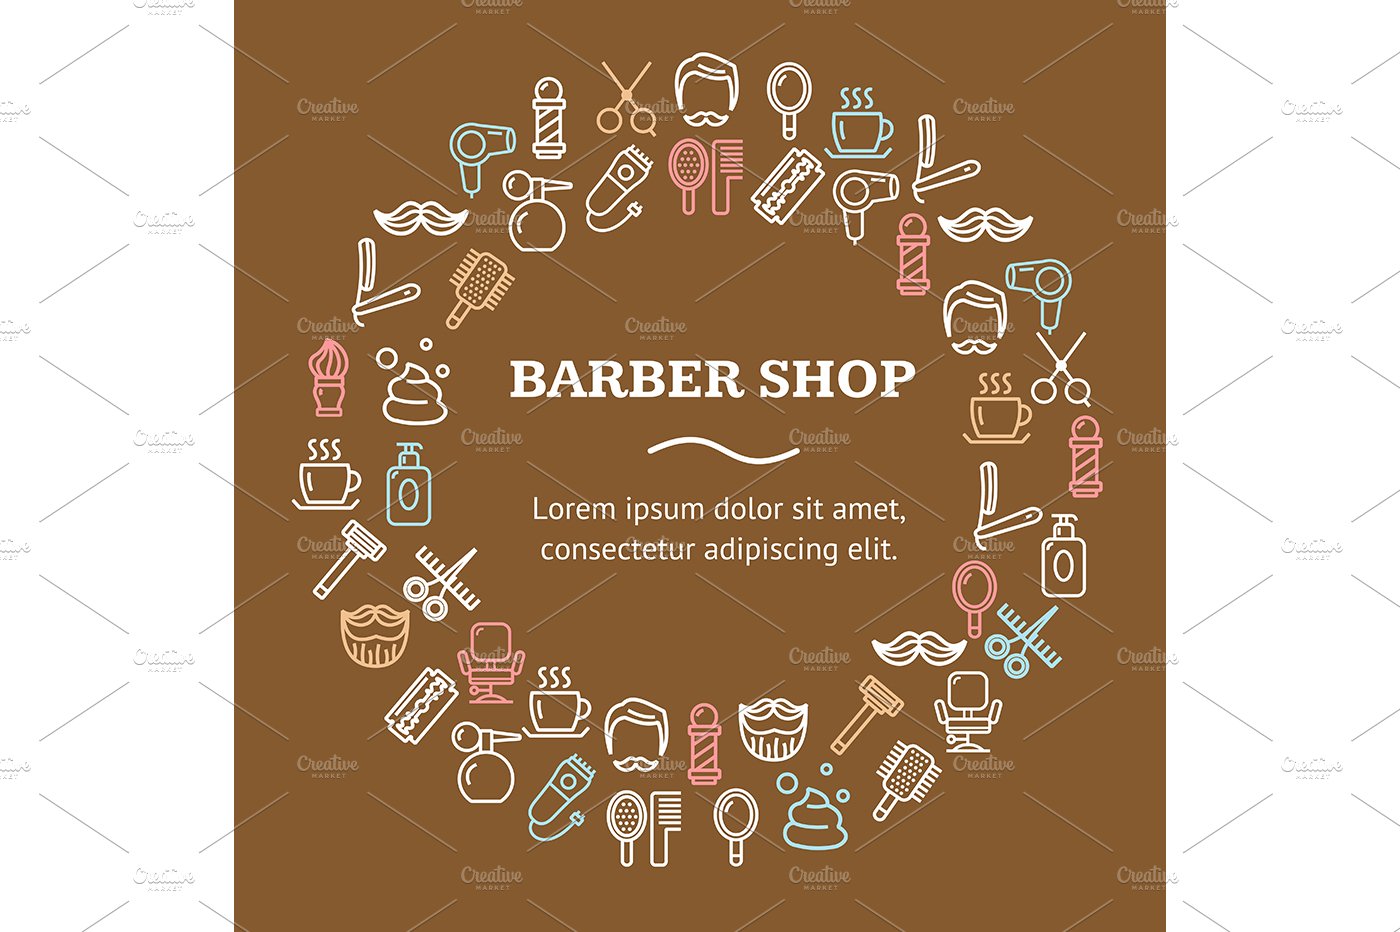 Barber Shop Round Design Template cover image.